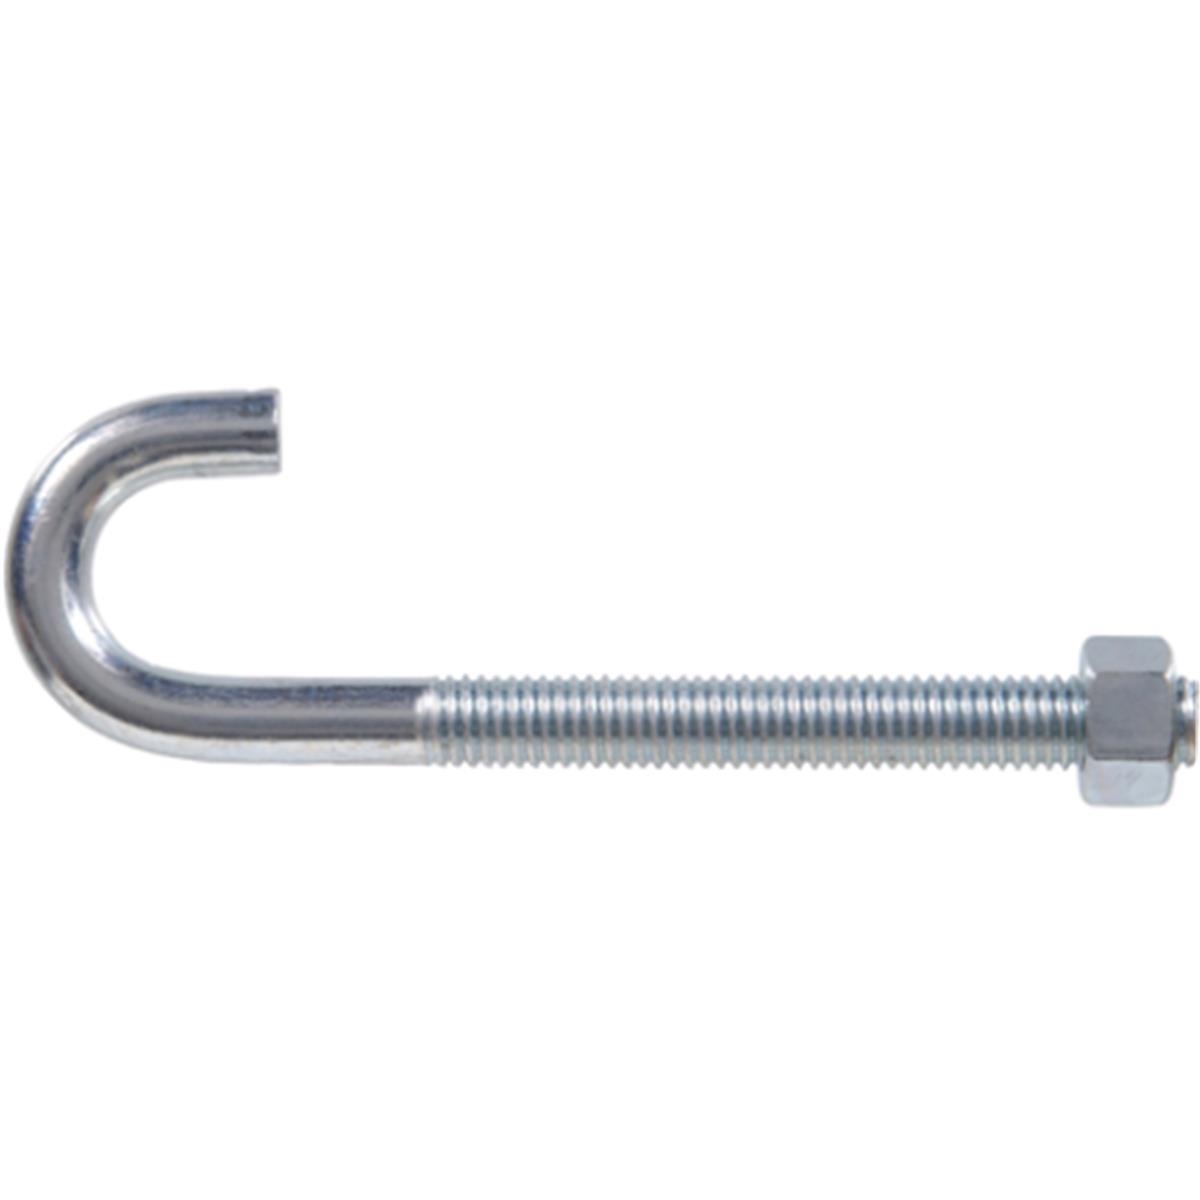 0.31-18 X 3 In. Zinc Plated J-bolt With Nut, Pack Of 10